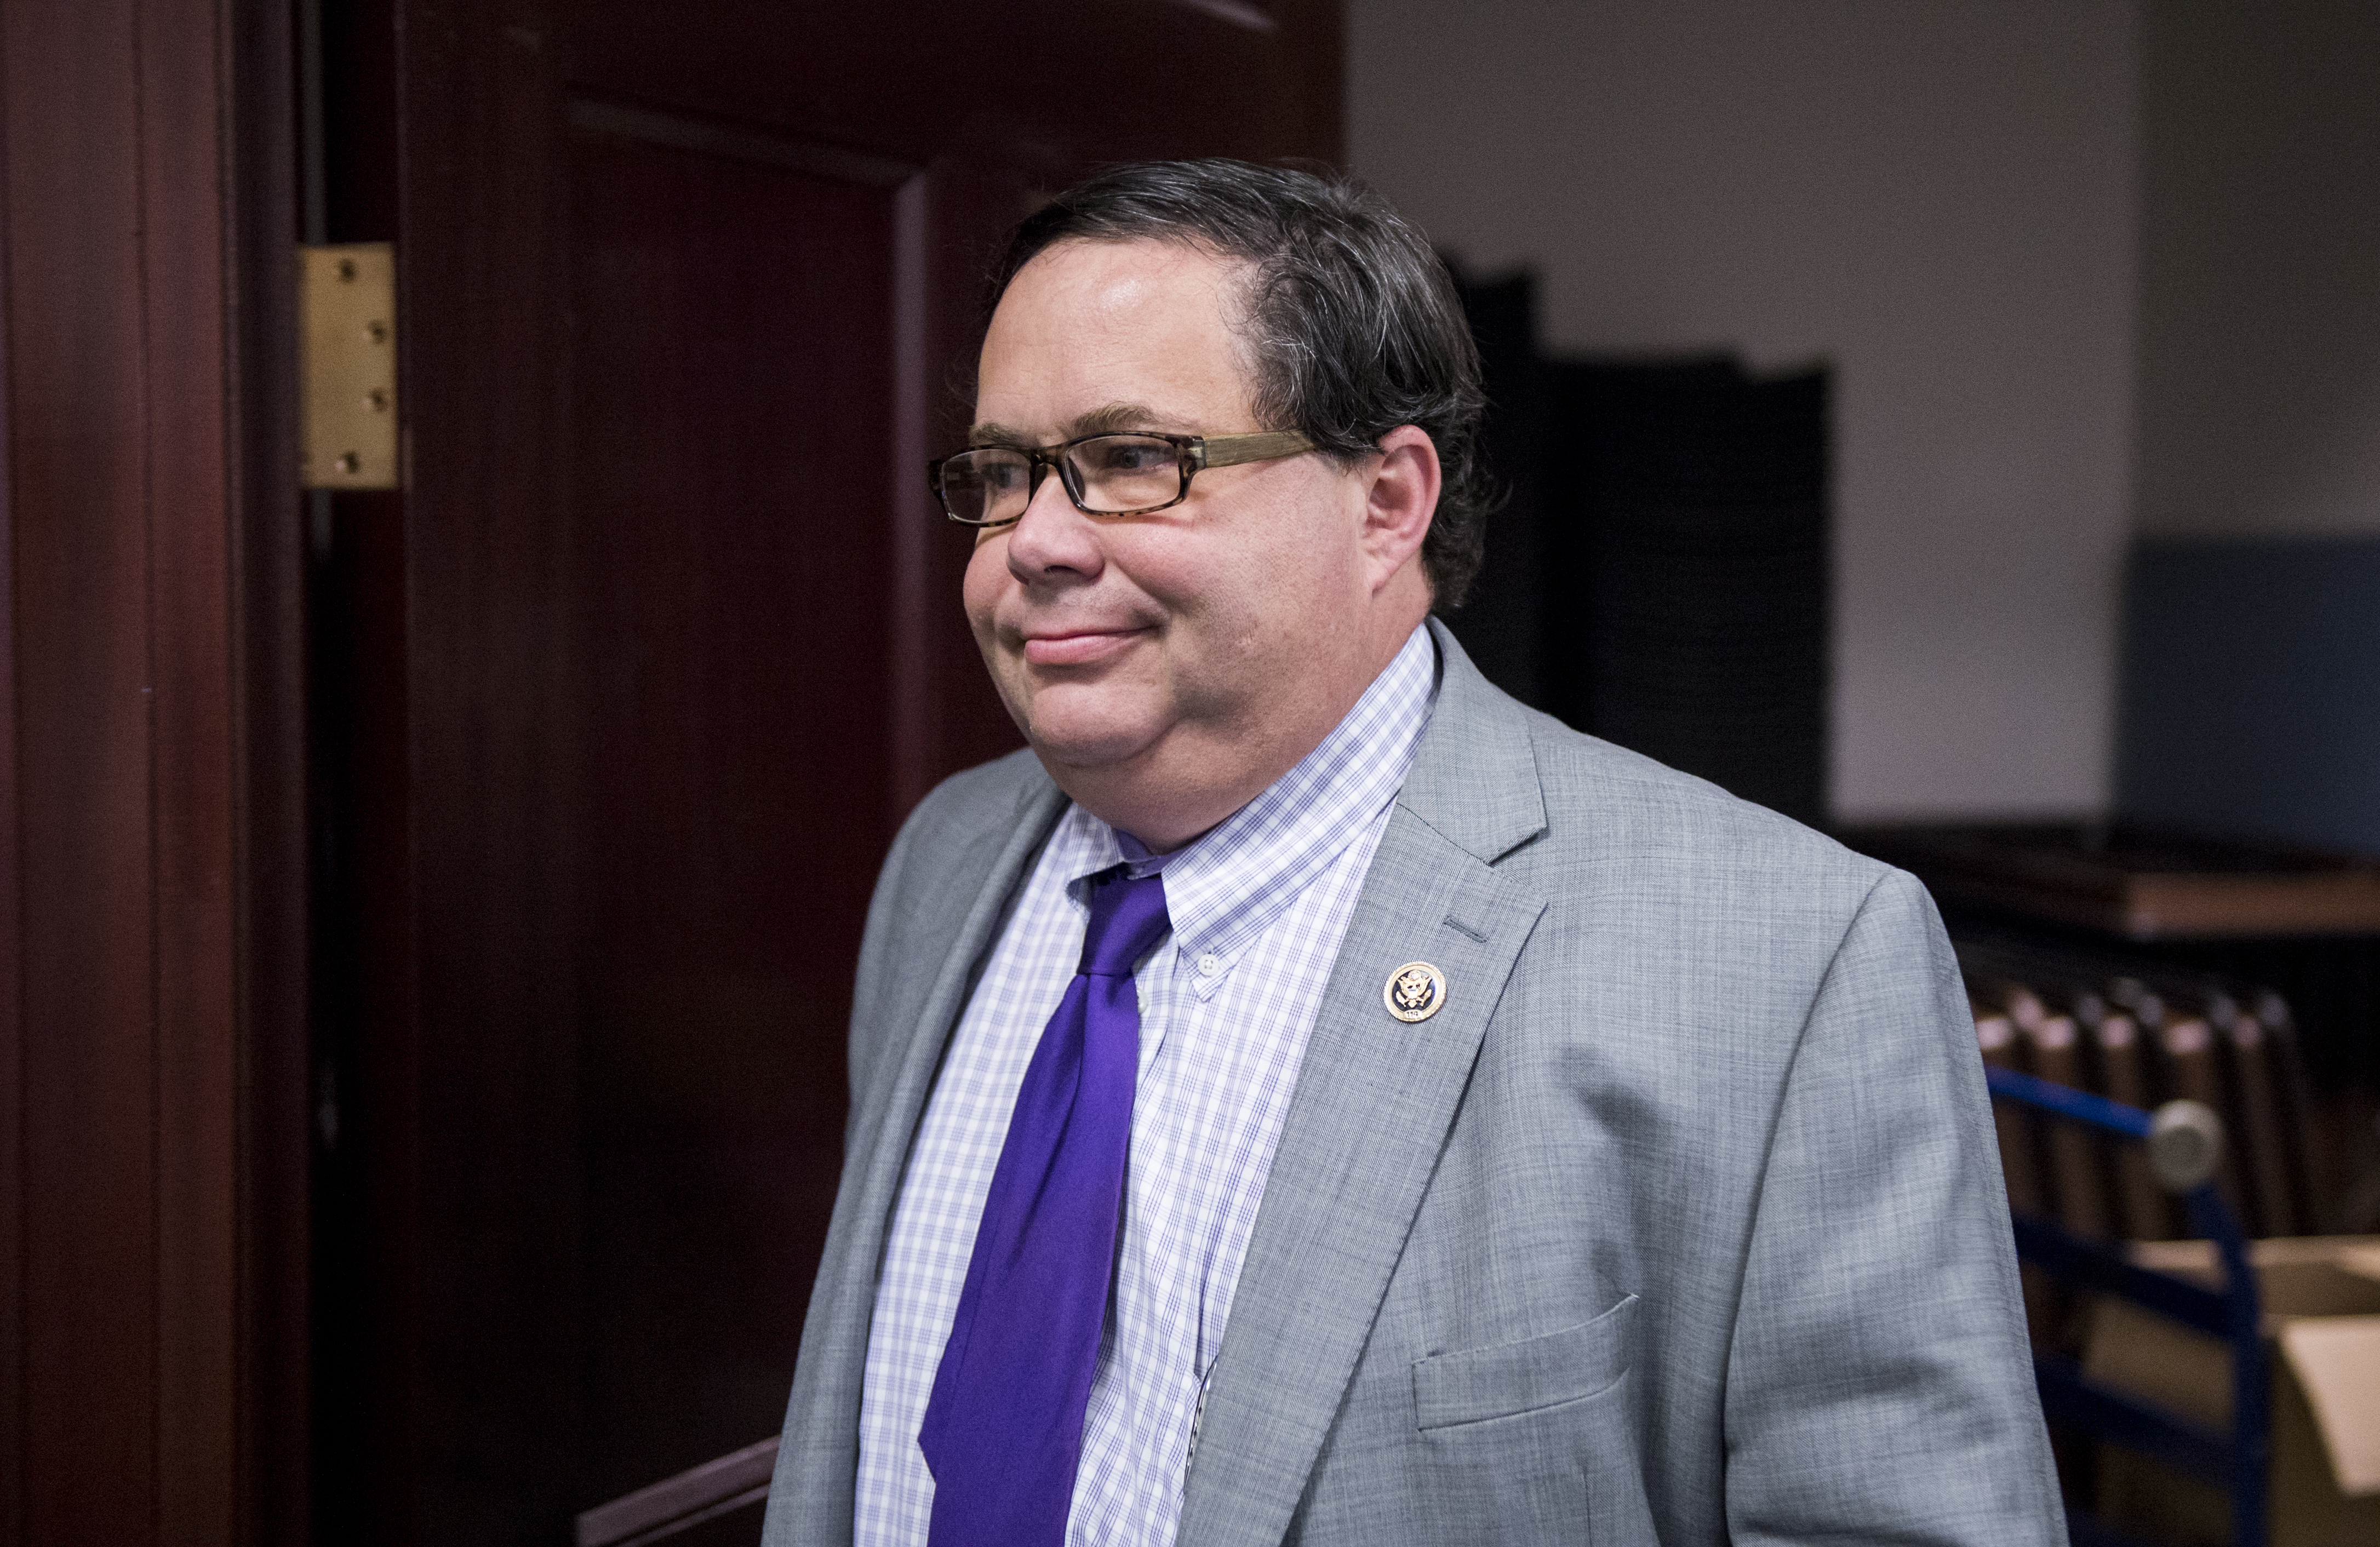 Rep. Blake Farenthold, R-Texas, leaves the House Republican Conference meeting in the basement of the U.S. Capitol on Tuesday, Sept. 29, 2015. (Bill Clark&mdash;CQ-Roll Call,Inc./Getty Images)